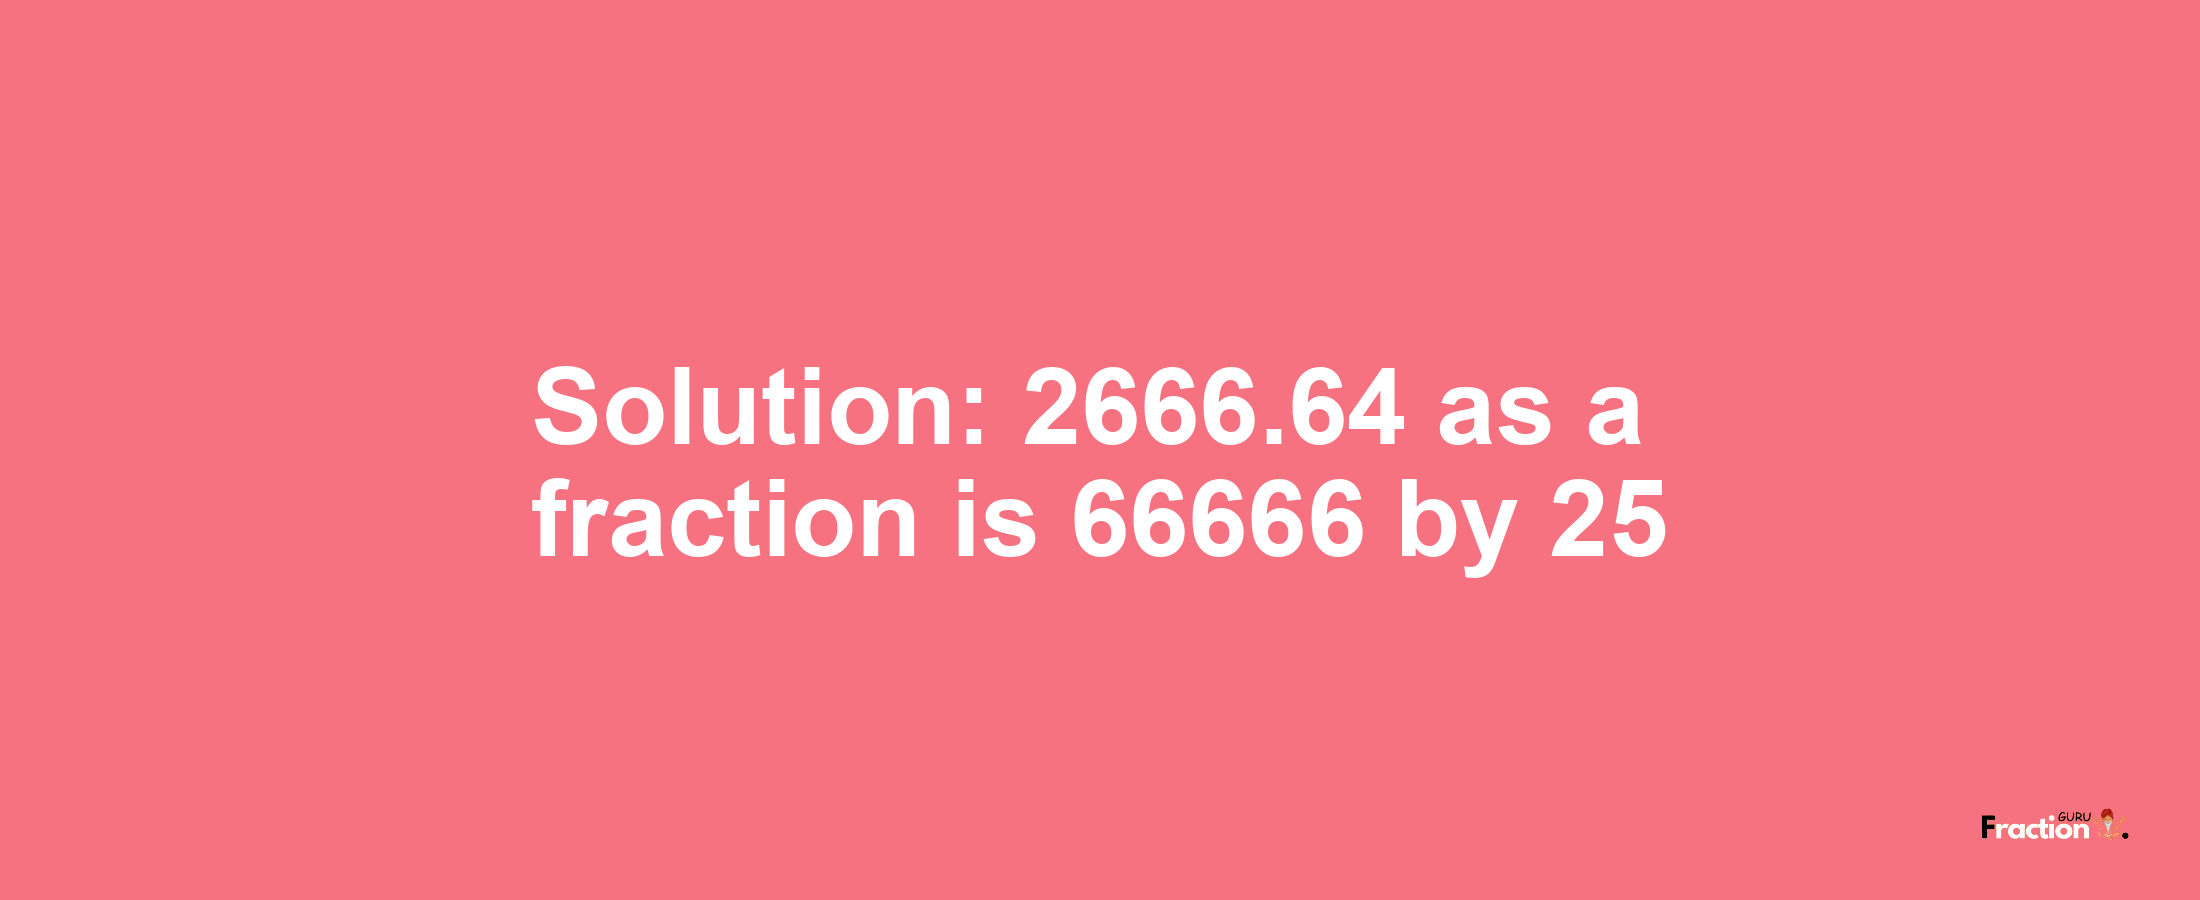 Solution:2666.64 as a fraction is 66666/25